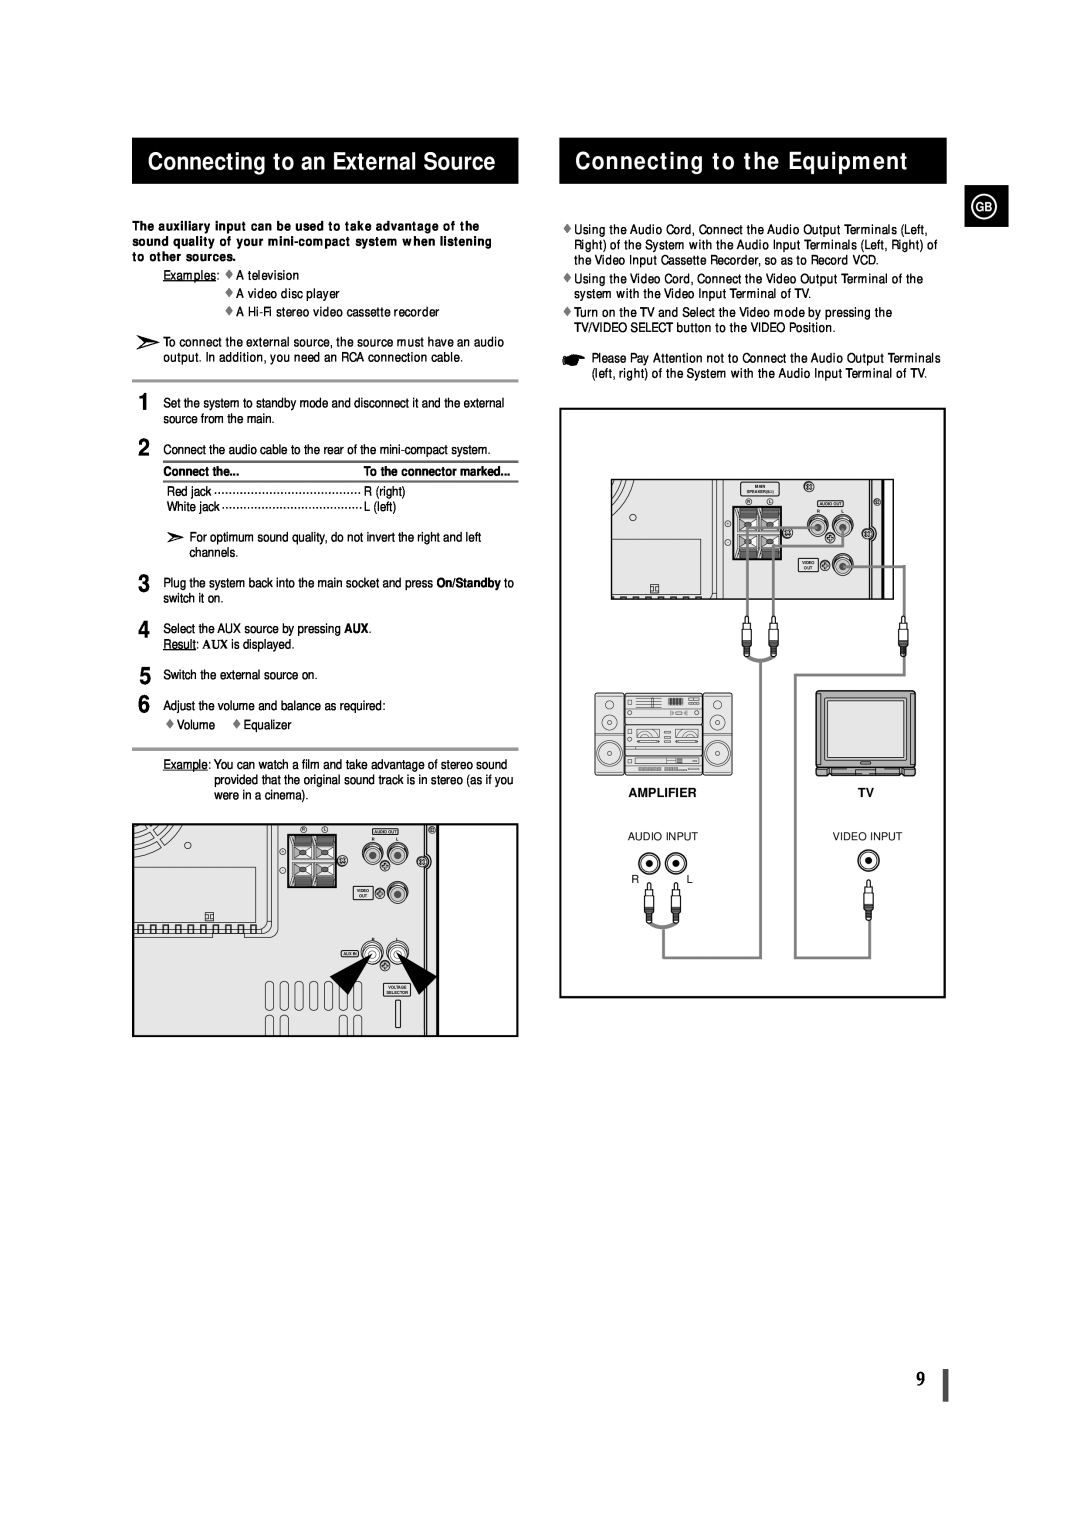 Samsung MAX-VL85 instruction manual Connecting to an External Source, Connecting to the Equipment, Connect the, Amplifier 